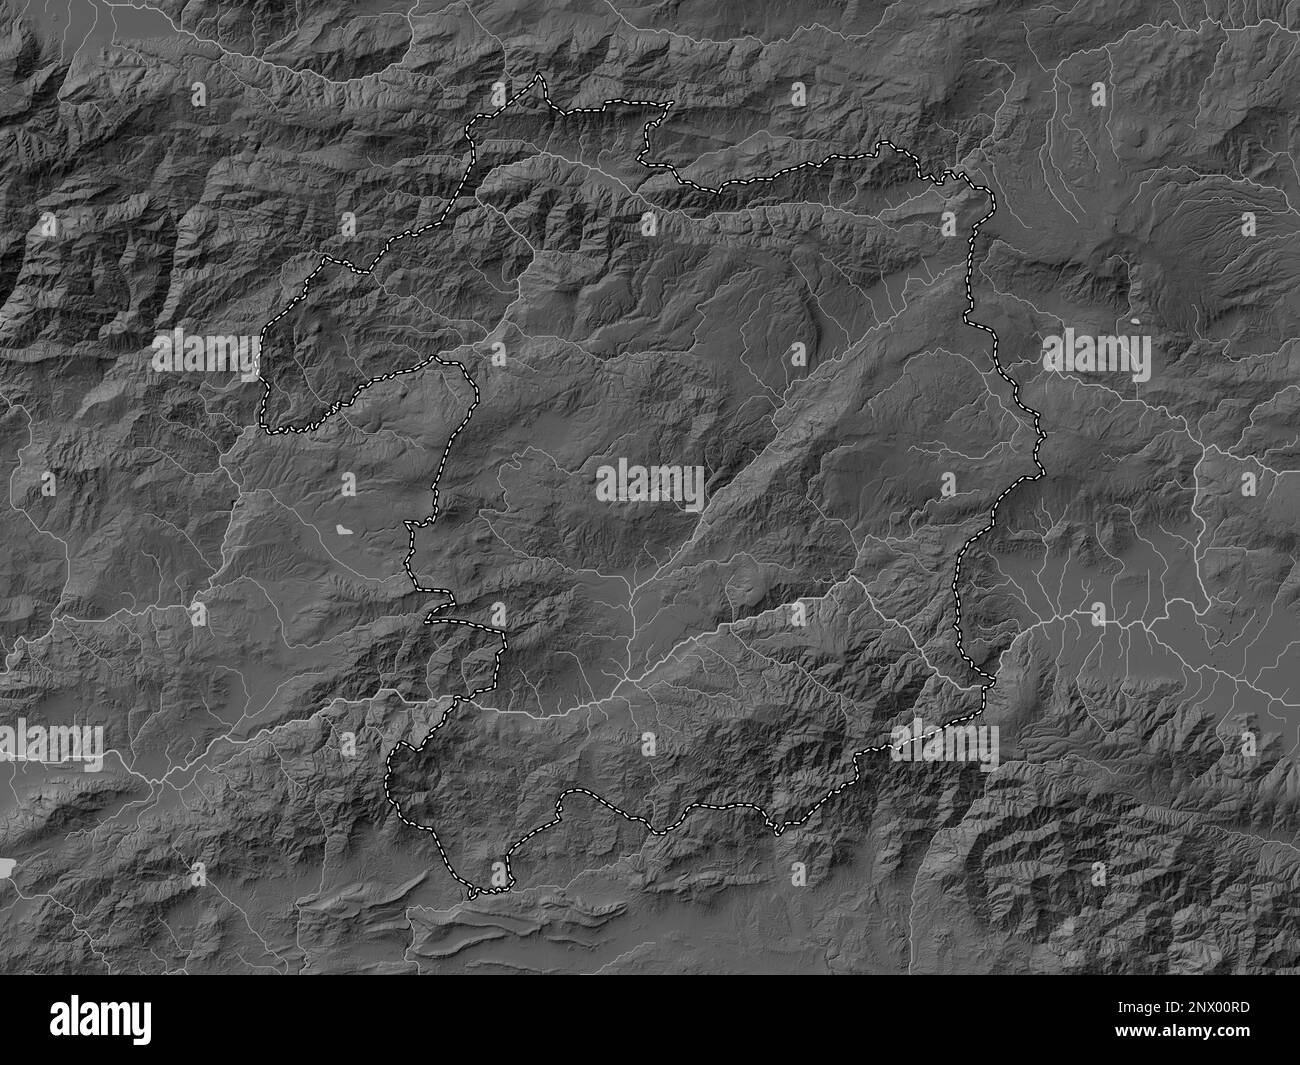 Bingol, province of Turkiye. Grayscale elevation map with lakes and rivers Stock Photo